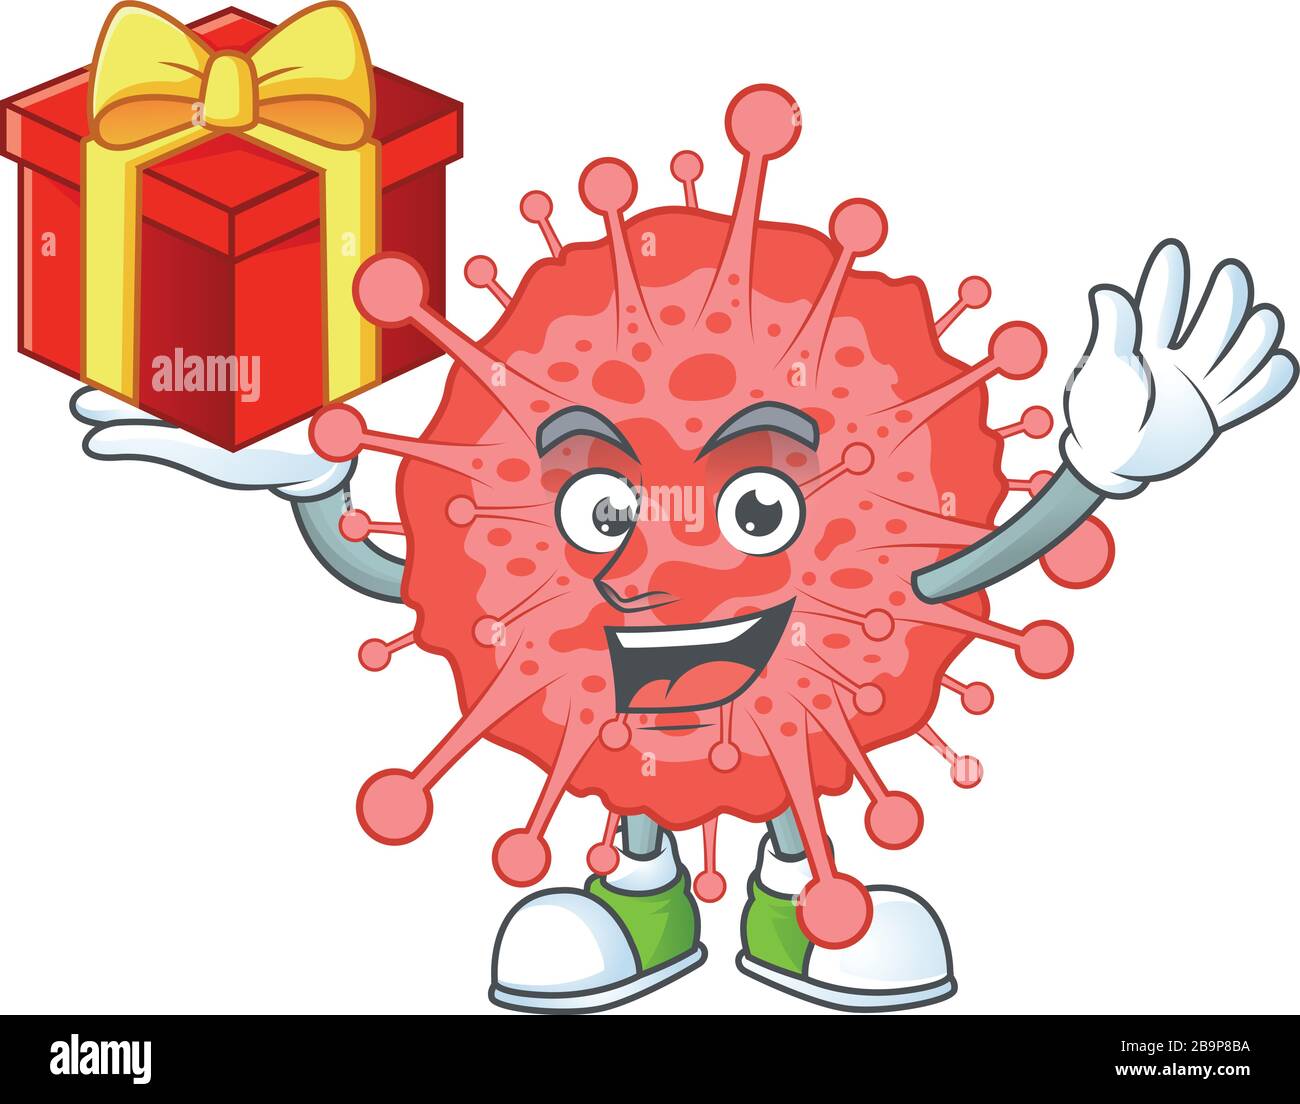 A mascot design style of coronavirus disaster showing crazy face Stock Vector